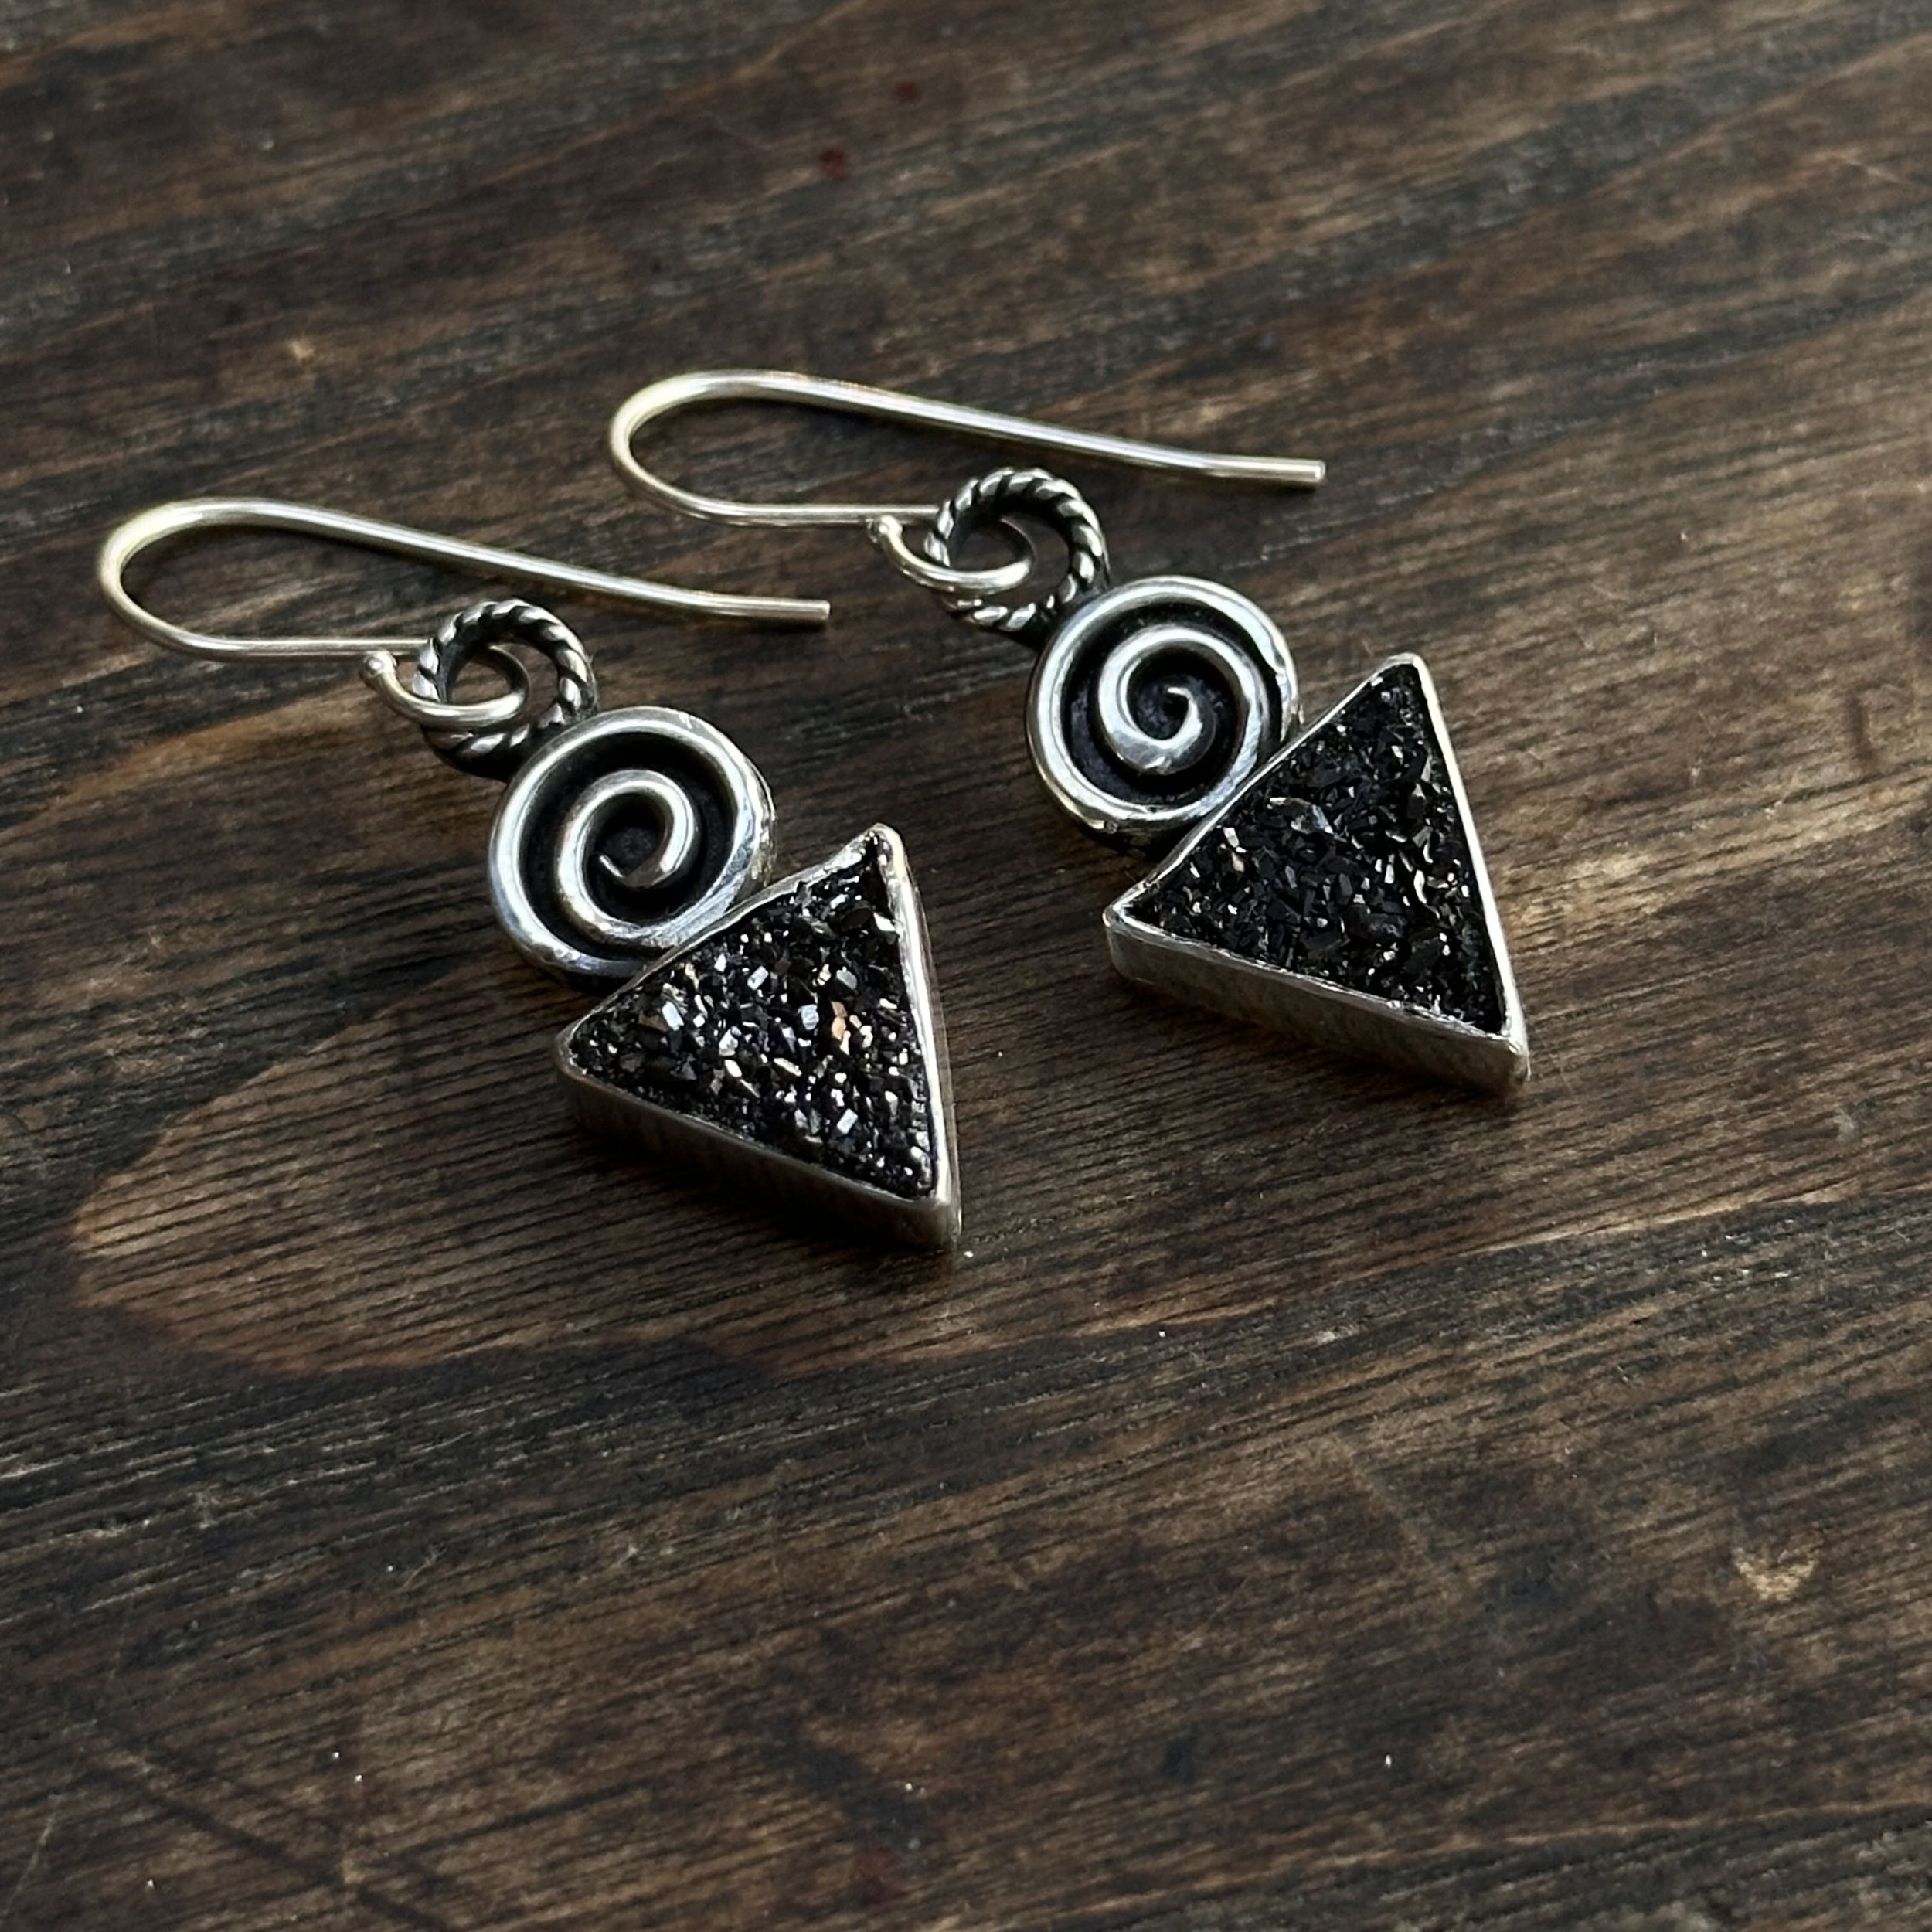 Black Druzy Earrings with Spirals - Dangle Earrings - Handmade in New  Hampshire, USA — Wendy Wetherbee - Nature Focused Artist & Metalsmith